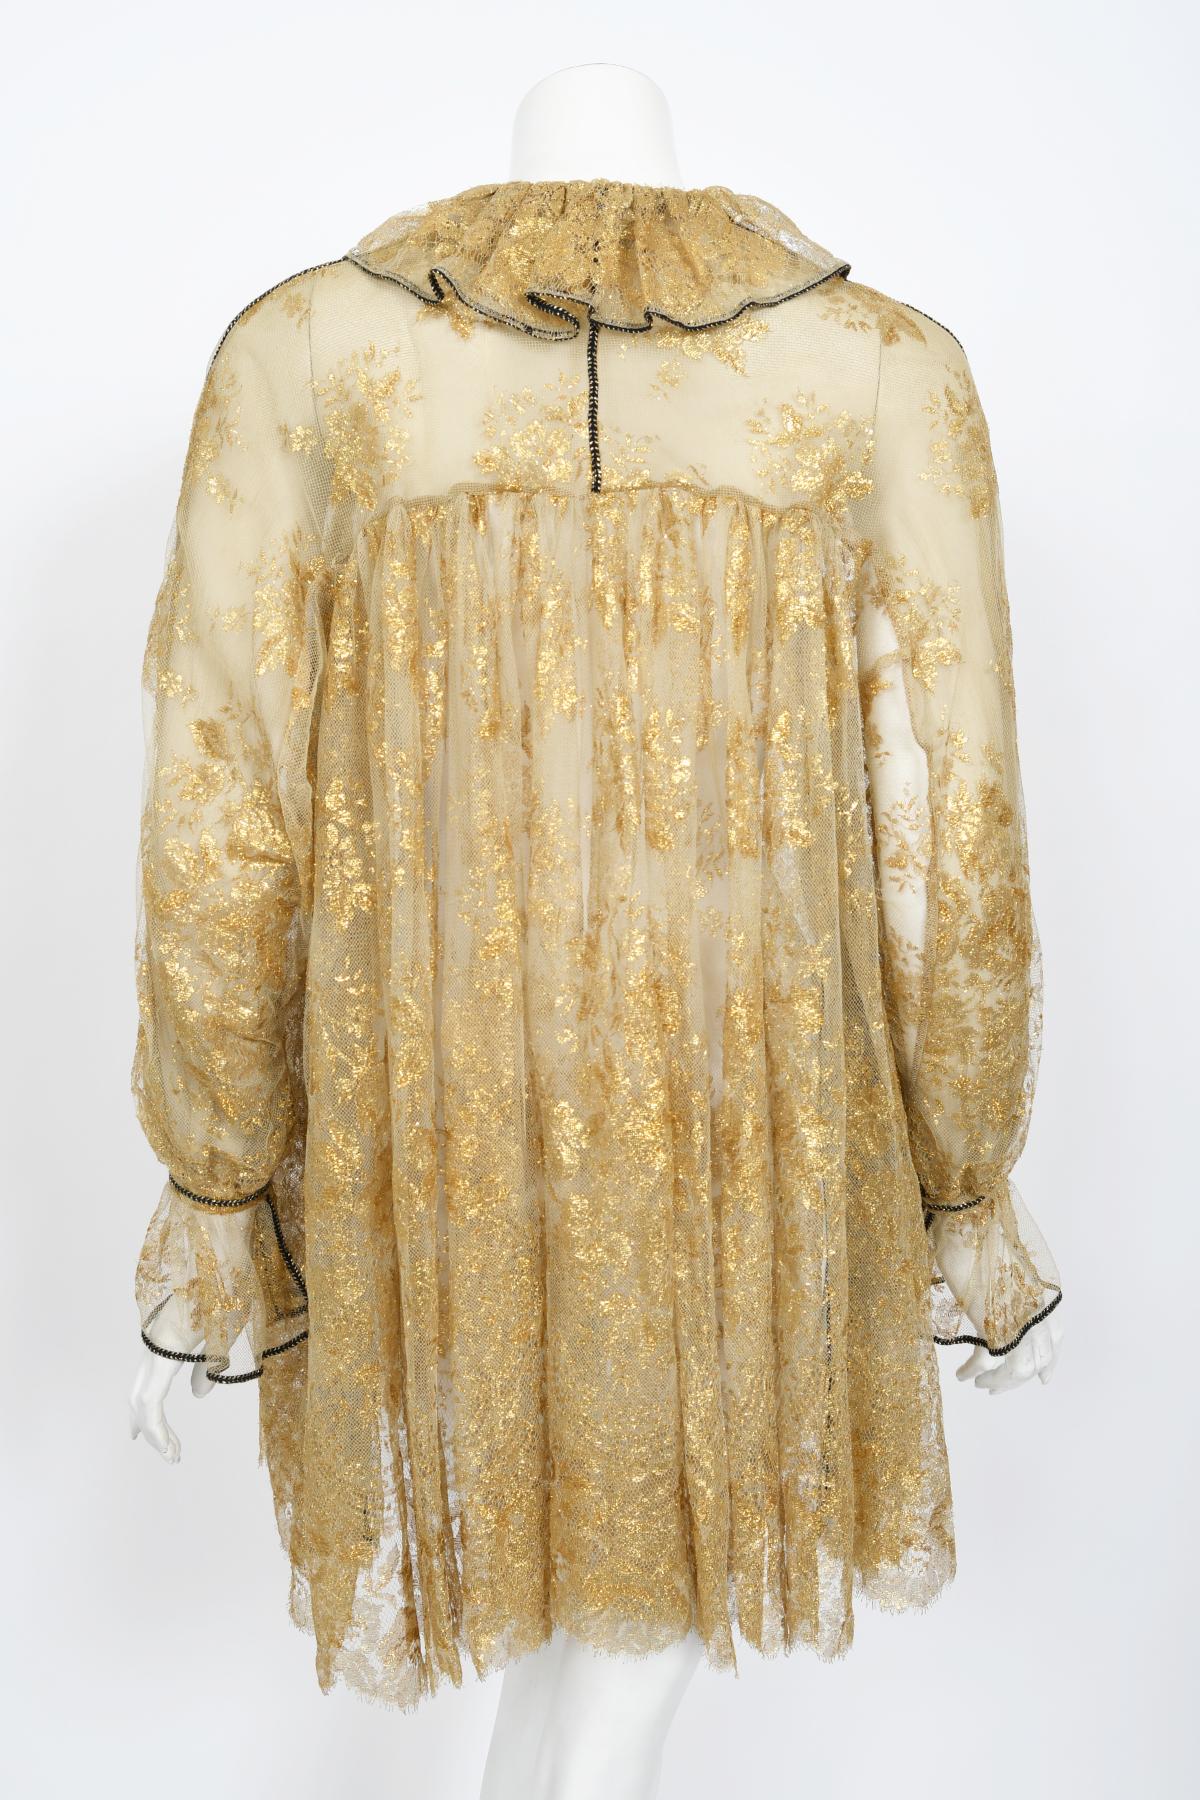 1970s Bill Gibb Couture Museum-Held Metallic Gold Sheer Lace Babydoll Mini Dress For Sale 8